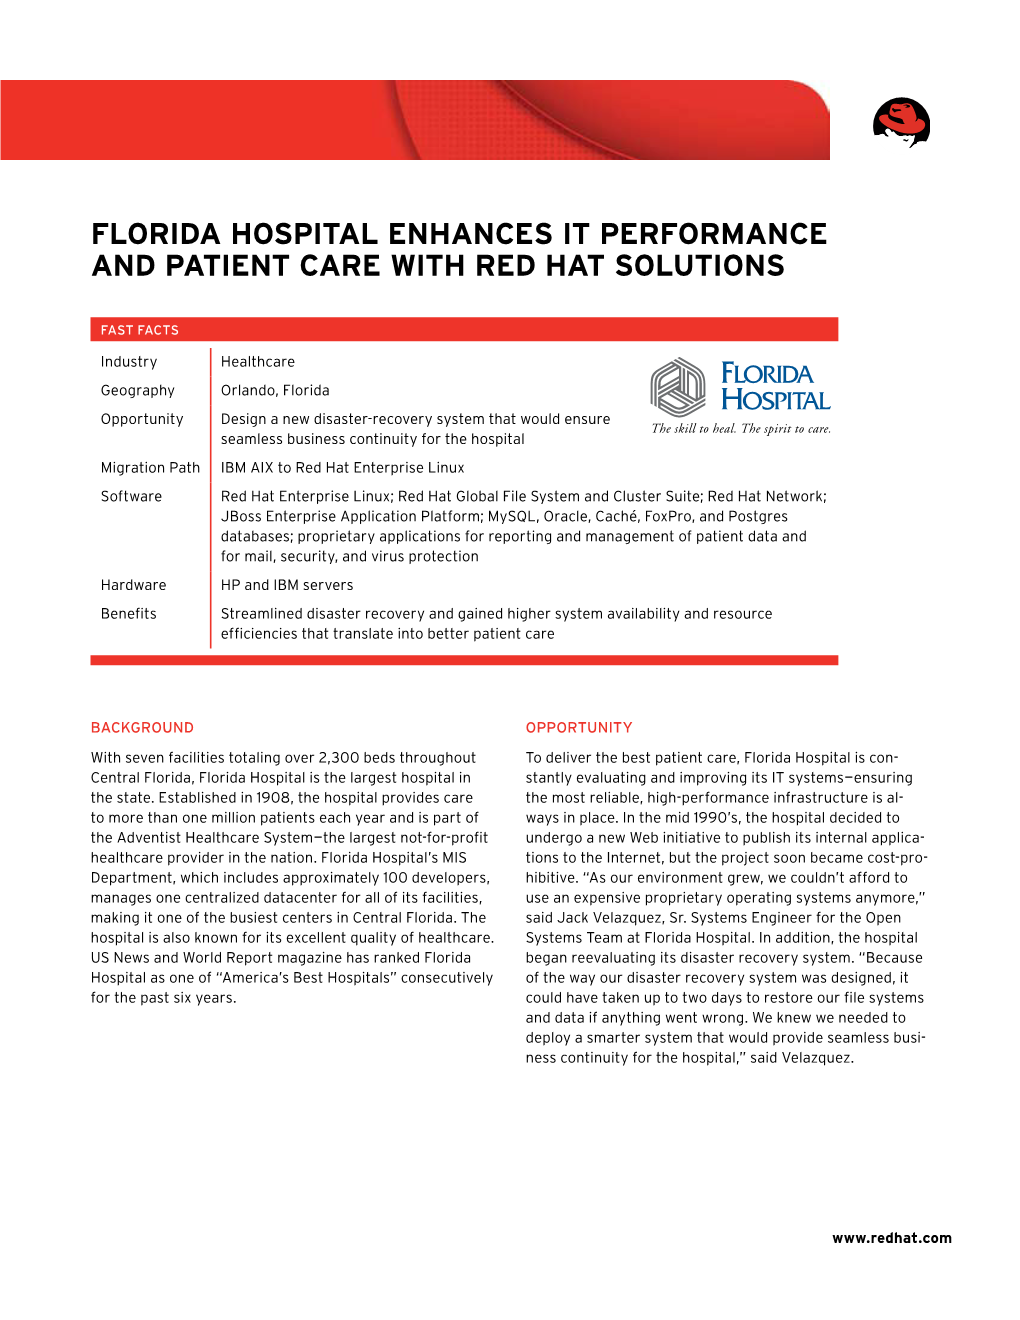 Florida Hospital Enhances IT Performance and Patient Care with Red Hat Solutions